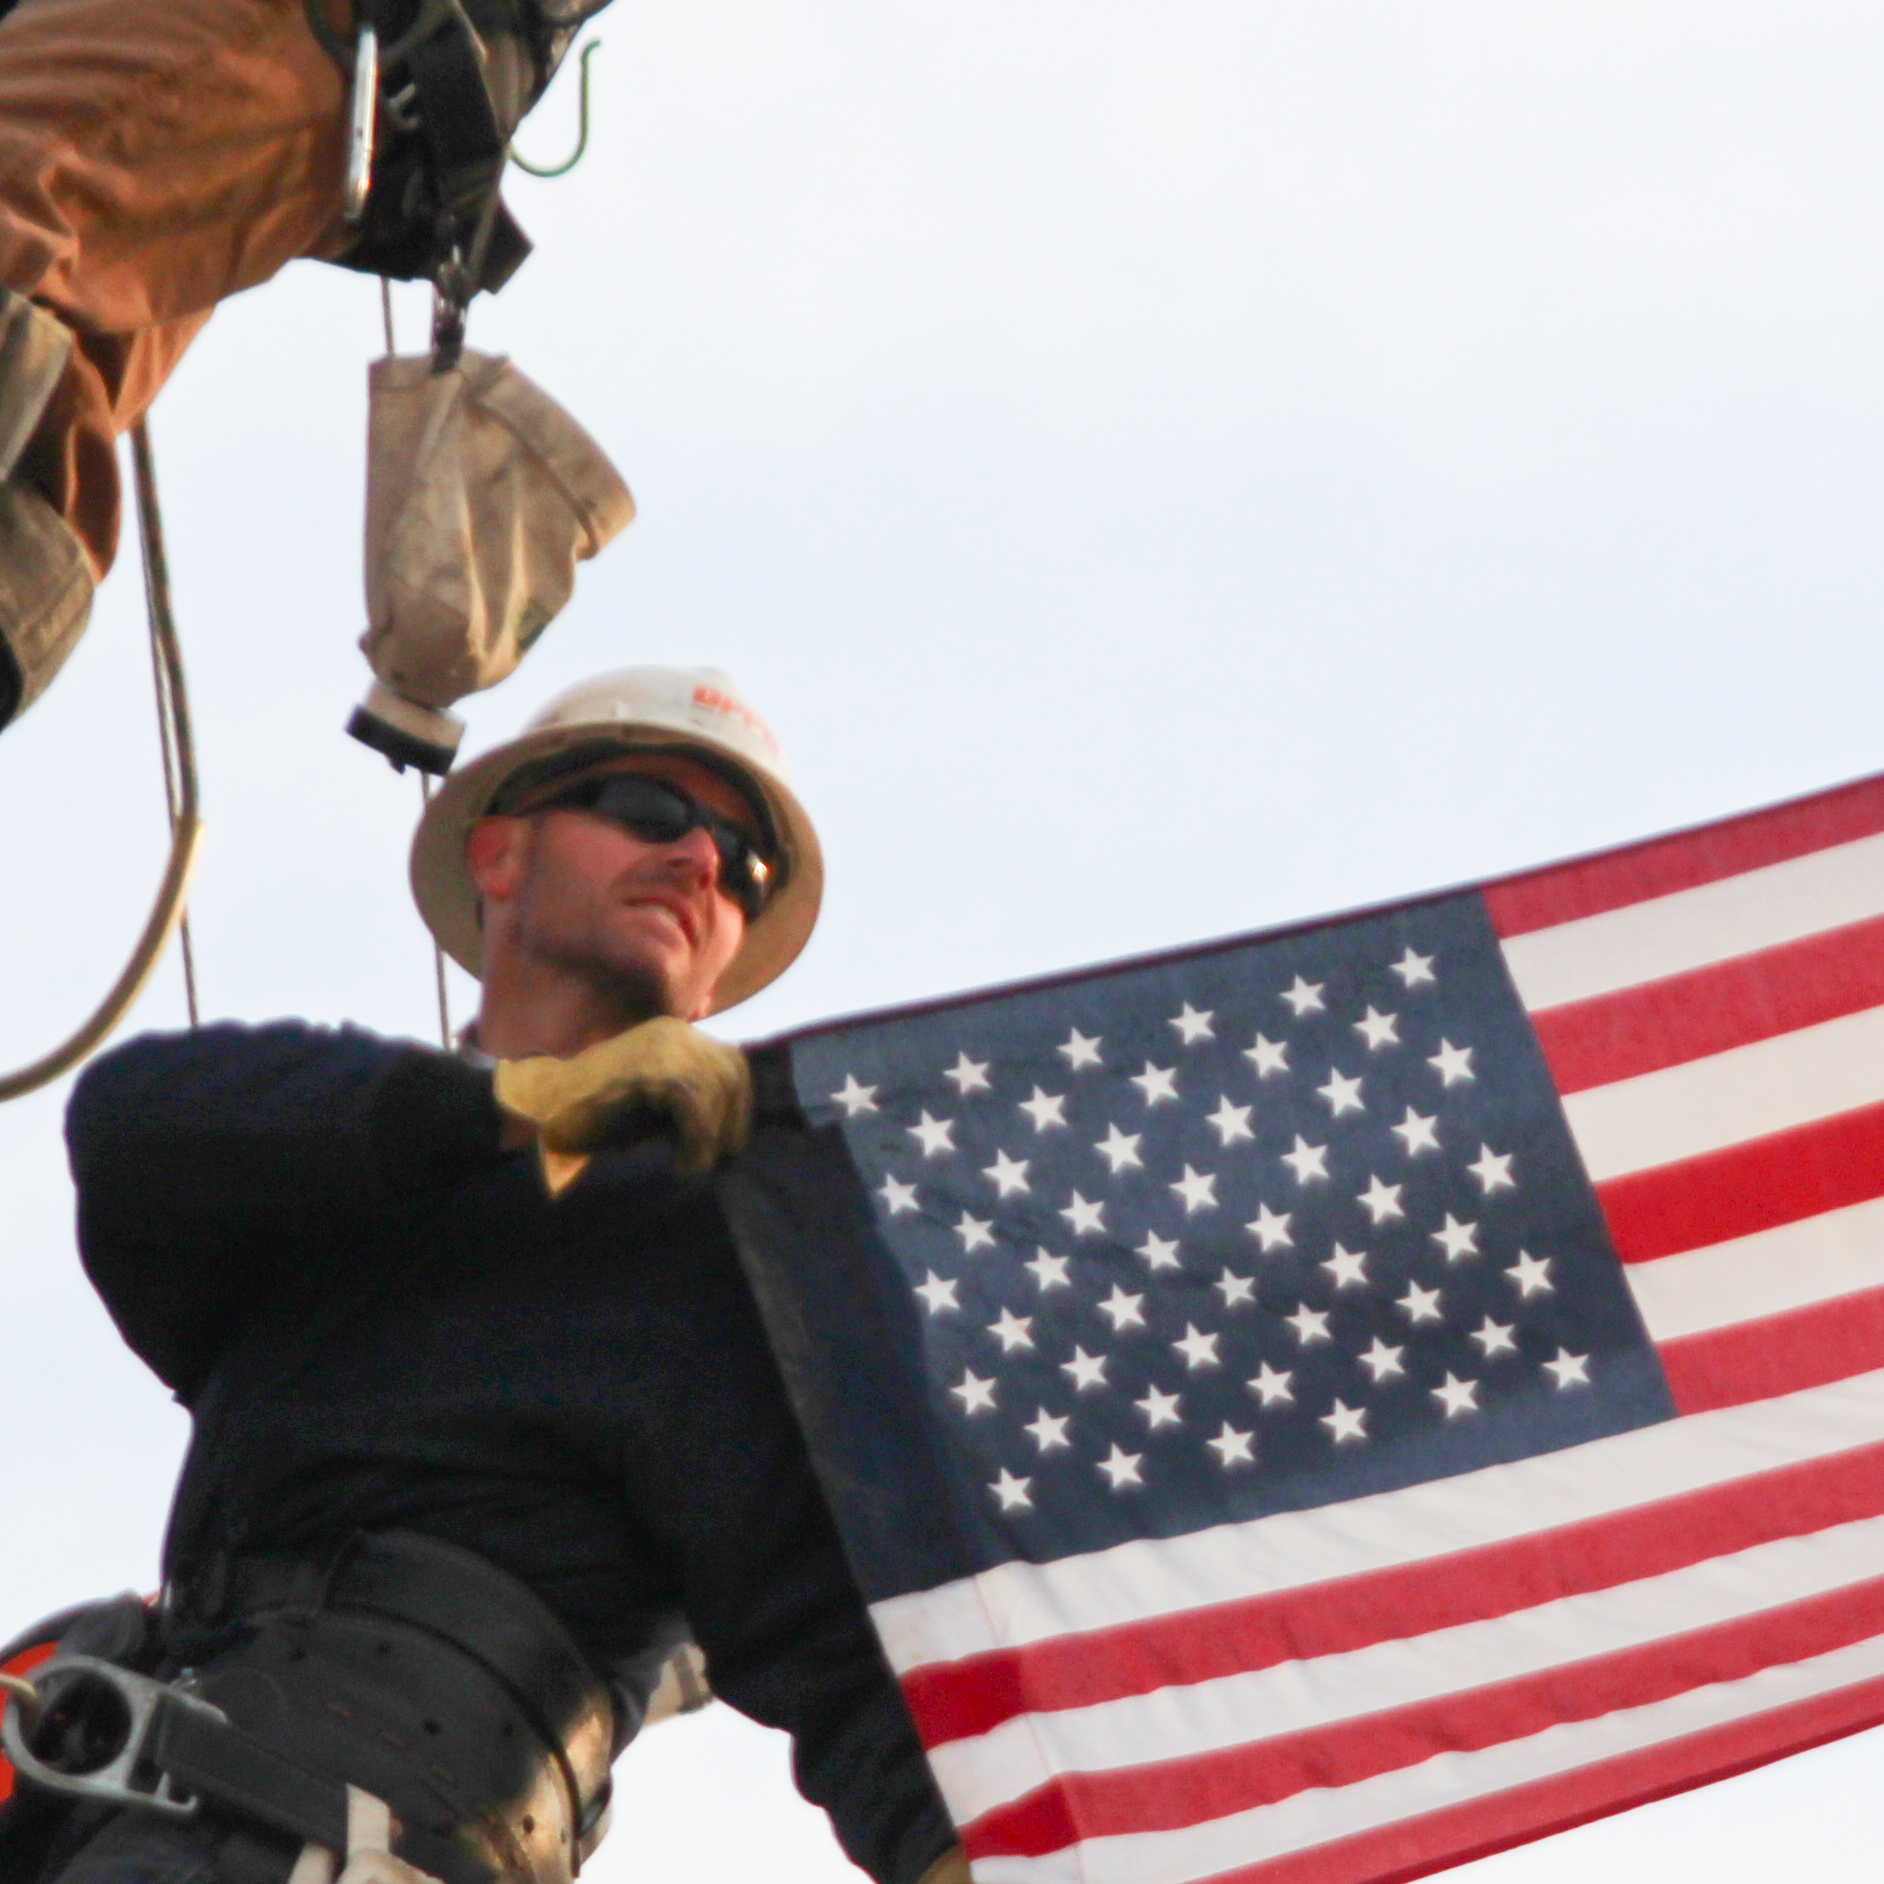 Lineworker with American flag